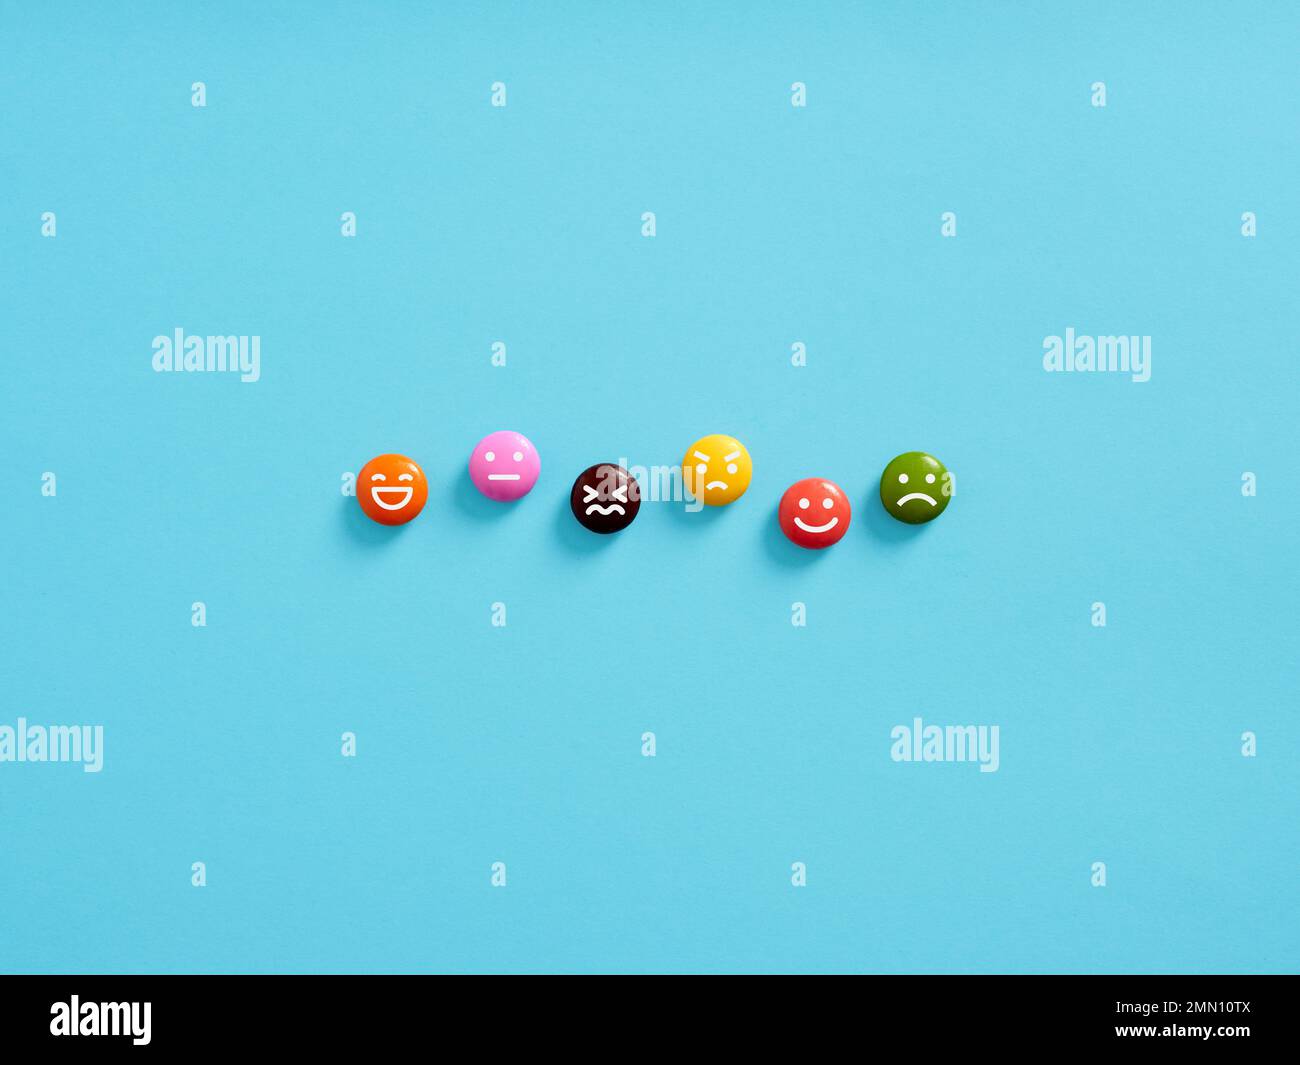 Joy, serenity, anger, happiness, sadness, delight, hate. Psychological mood swings. Variety of human emotions represented by emoticons on colored cand Stock Photo